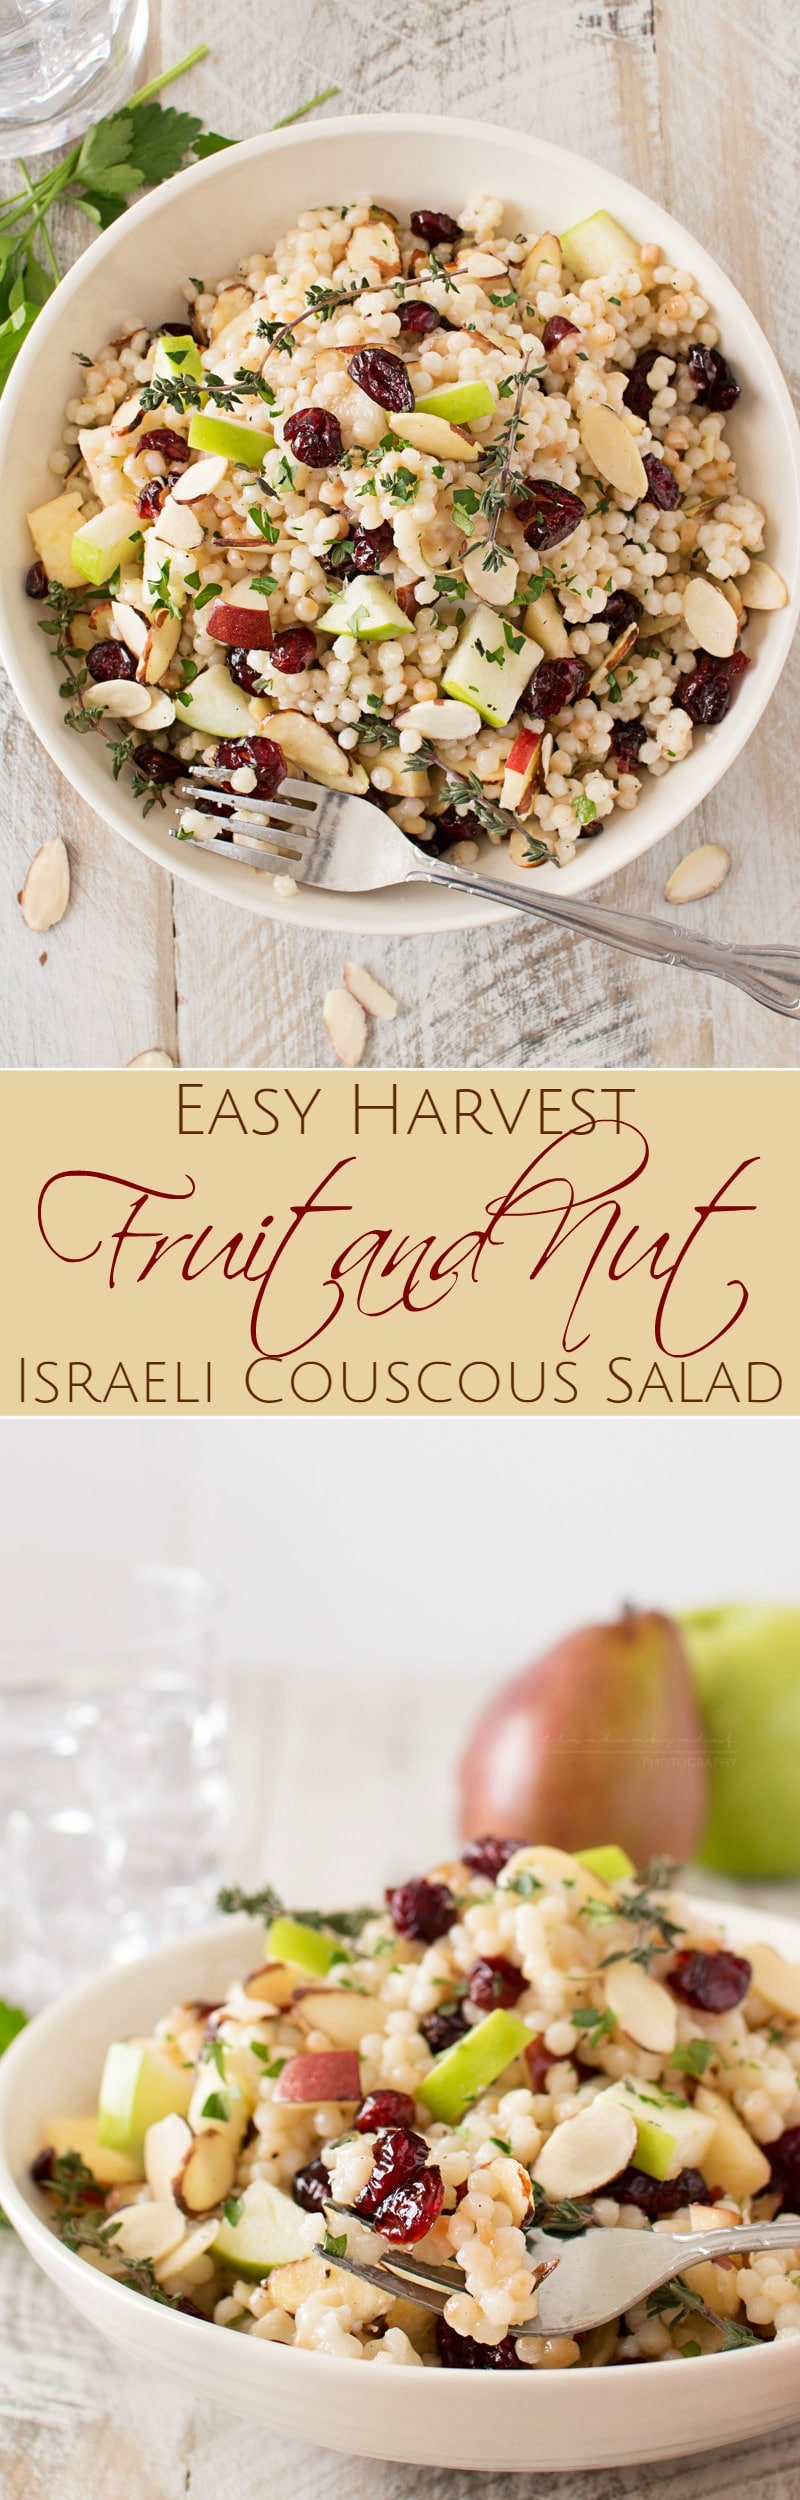 Harvest Israeli Couscous Salad | Israeli couscous is mixed with harvest fruits, almonds and herbs, then tossed with a flavorful maple mustard vinaigrette. Healthy and delicious! | http://thechunkychef.com